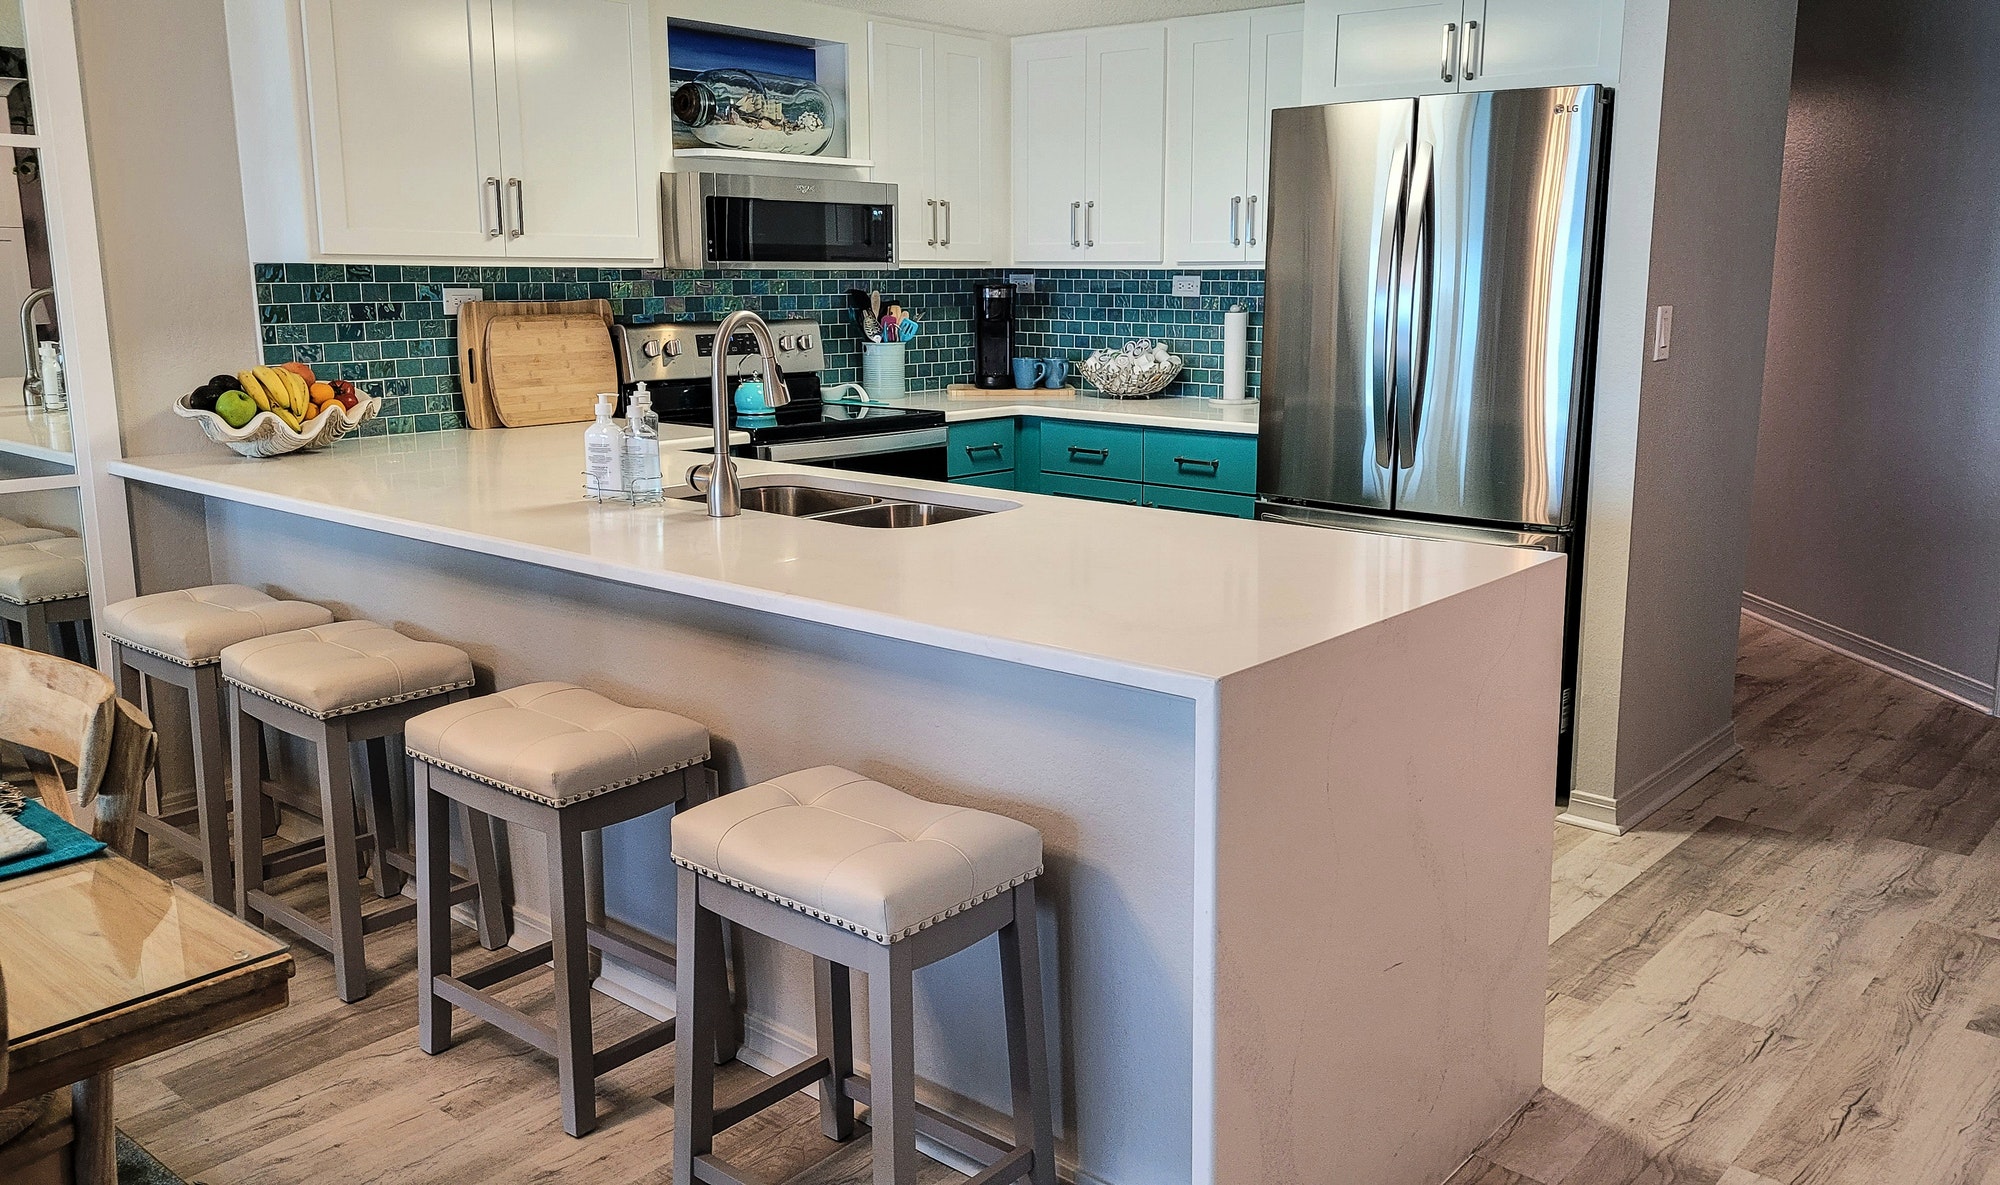 Home decor in home improvement with remodeling small kitchen in a beach condo.